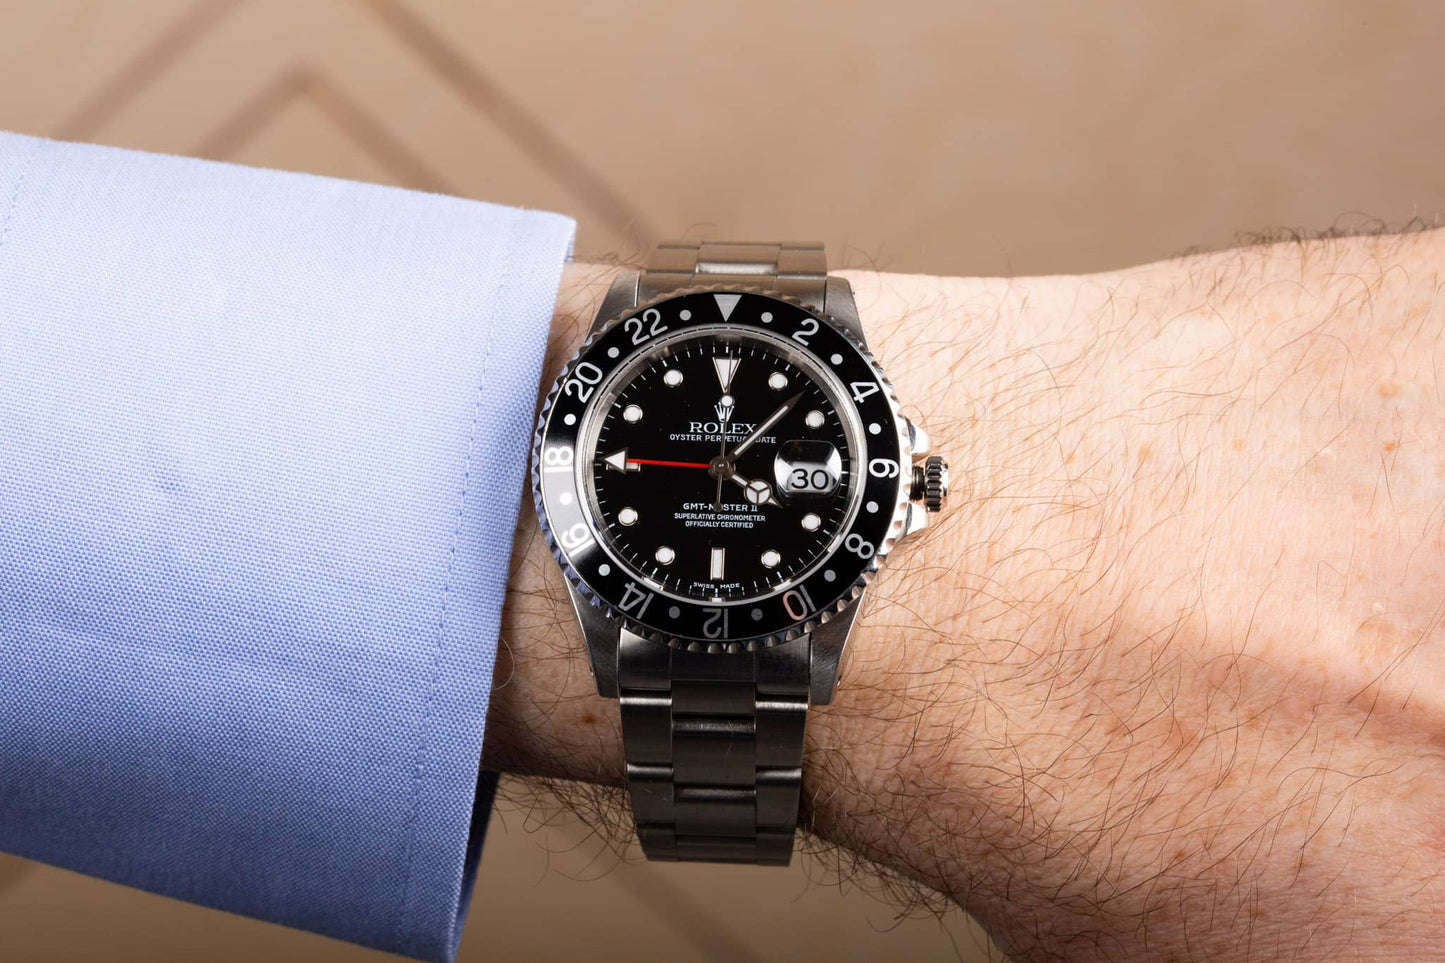 Rolex GMT Master II - 16710 man wearing the watch on his wrist